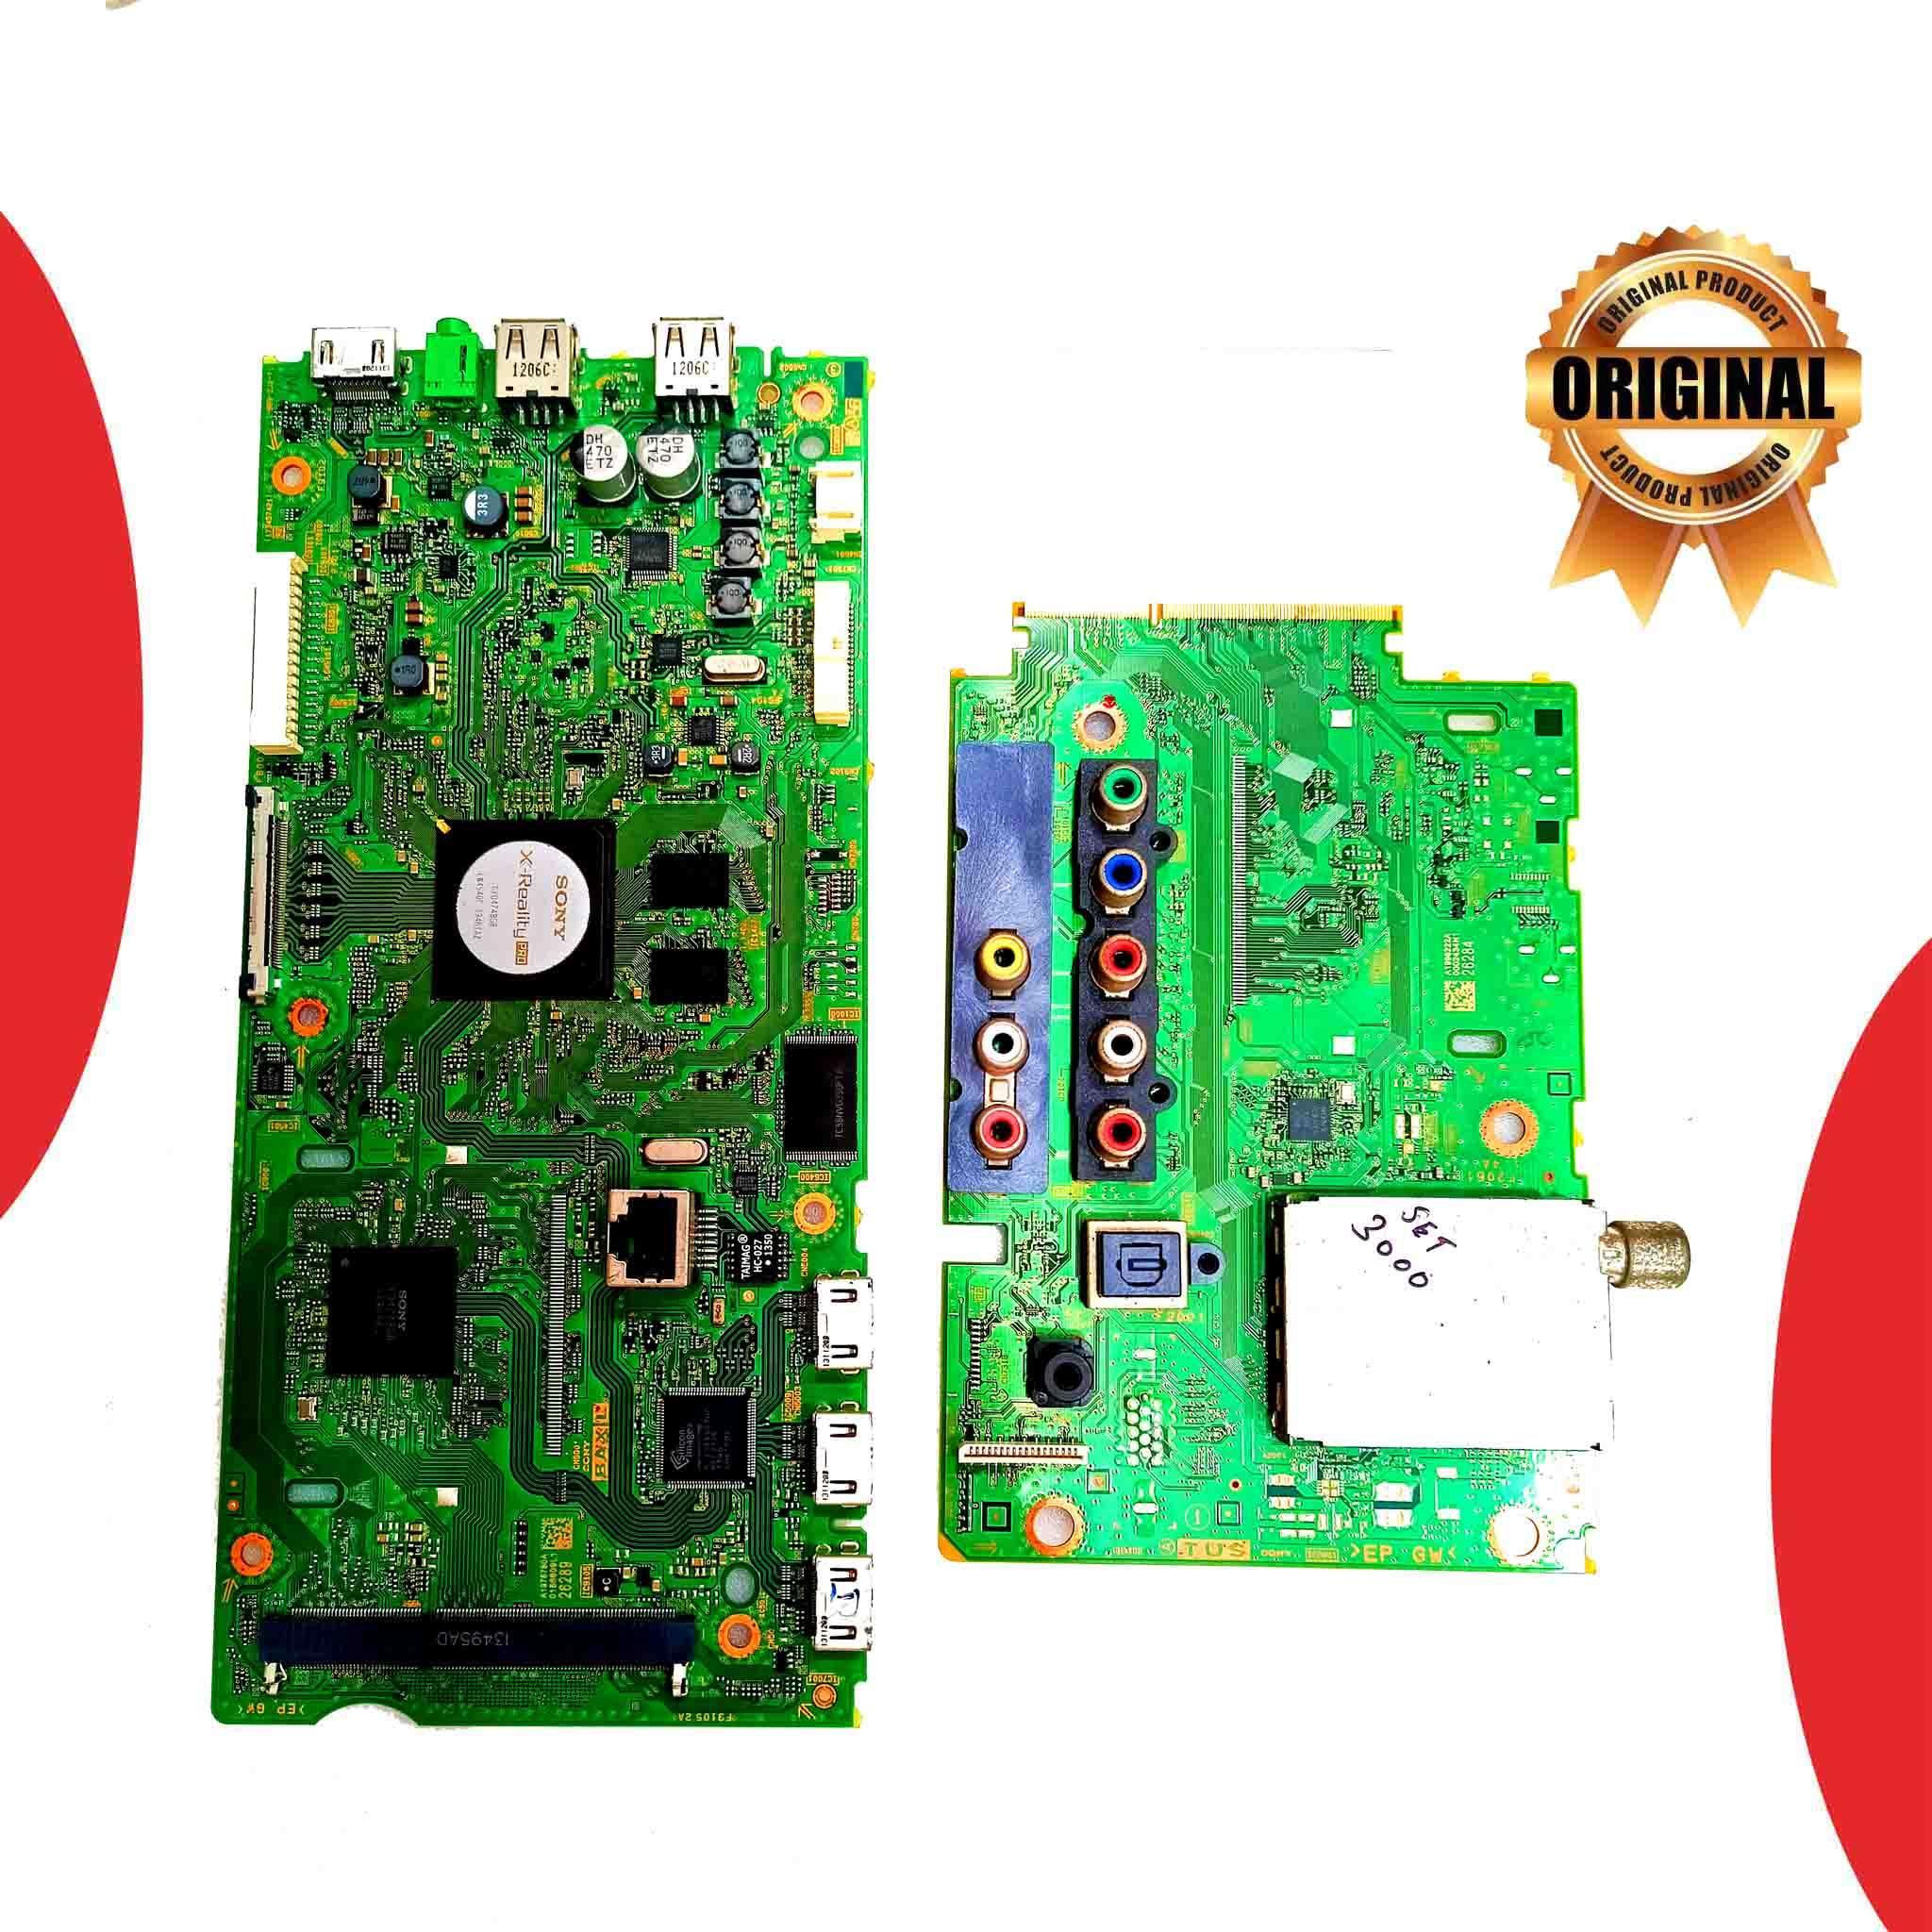 Model 32W700B Sony LED TV Motherboard at Attractive Price